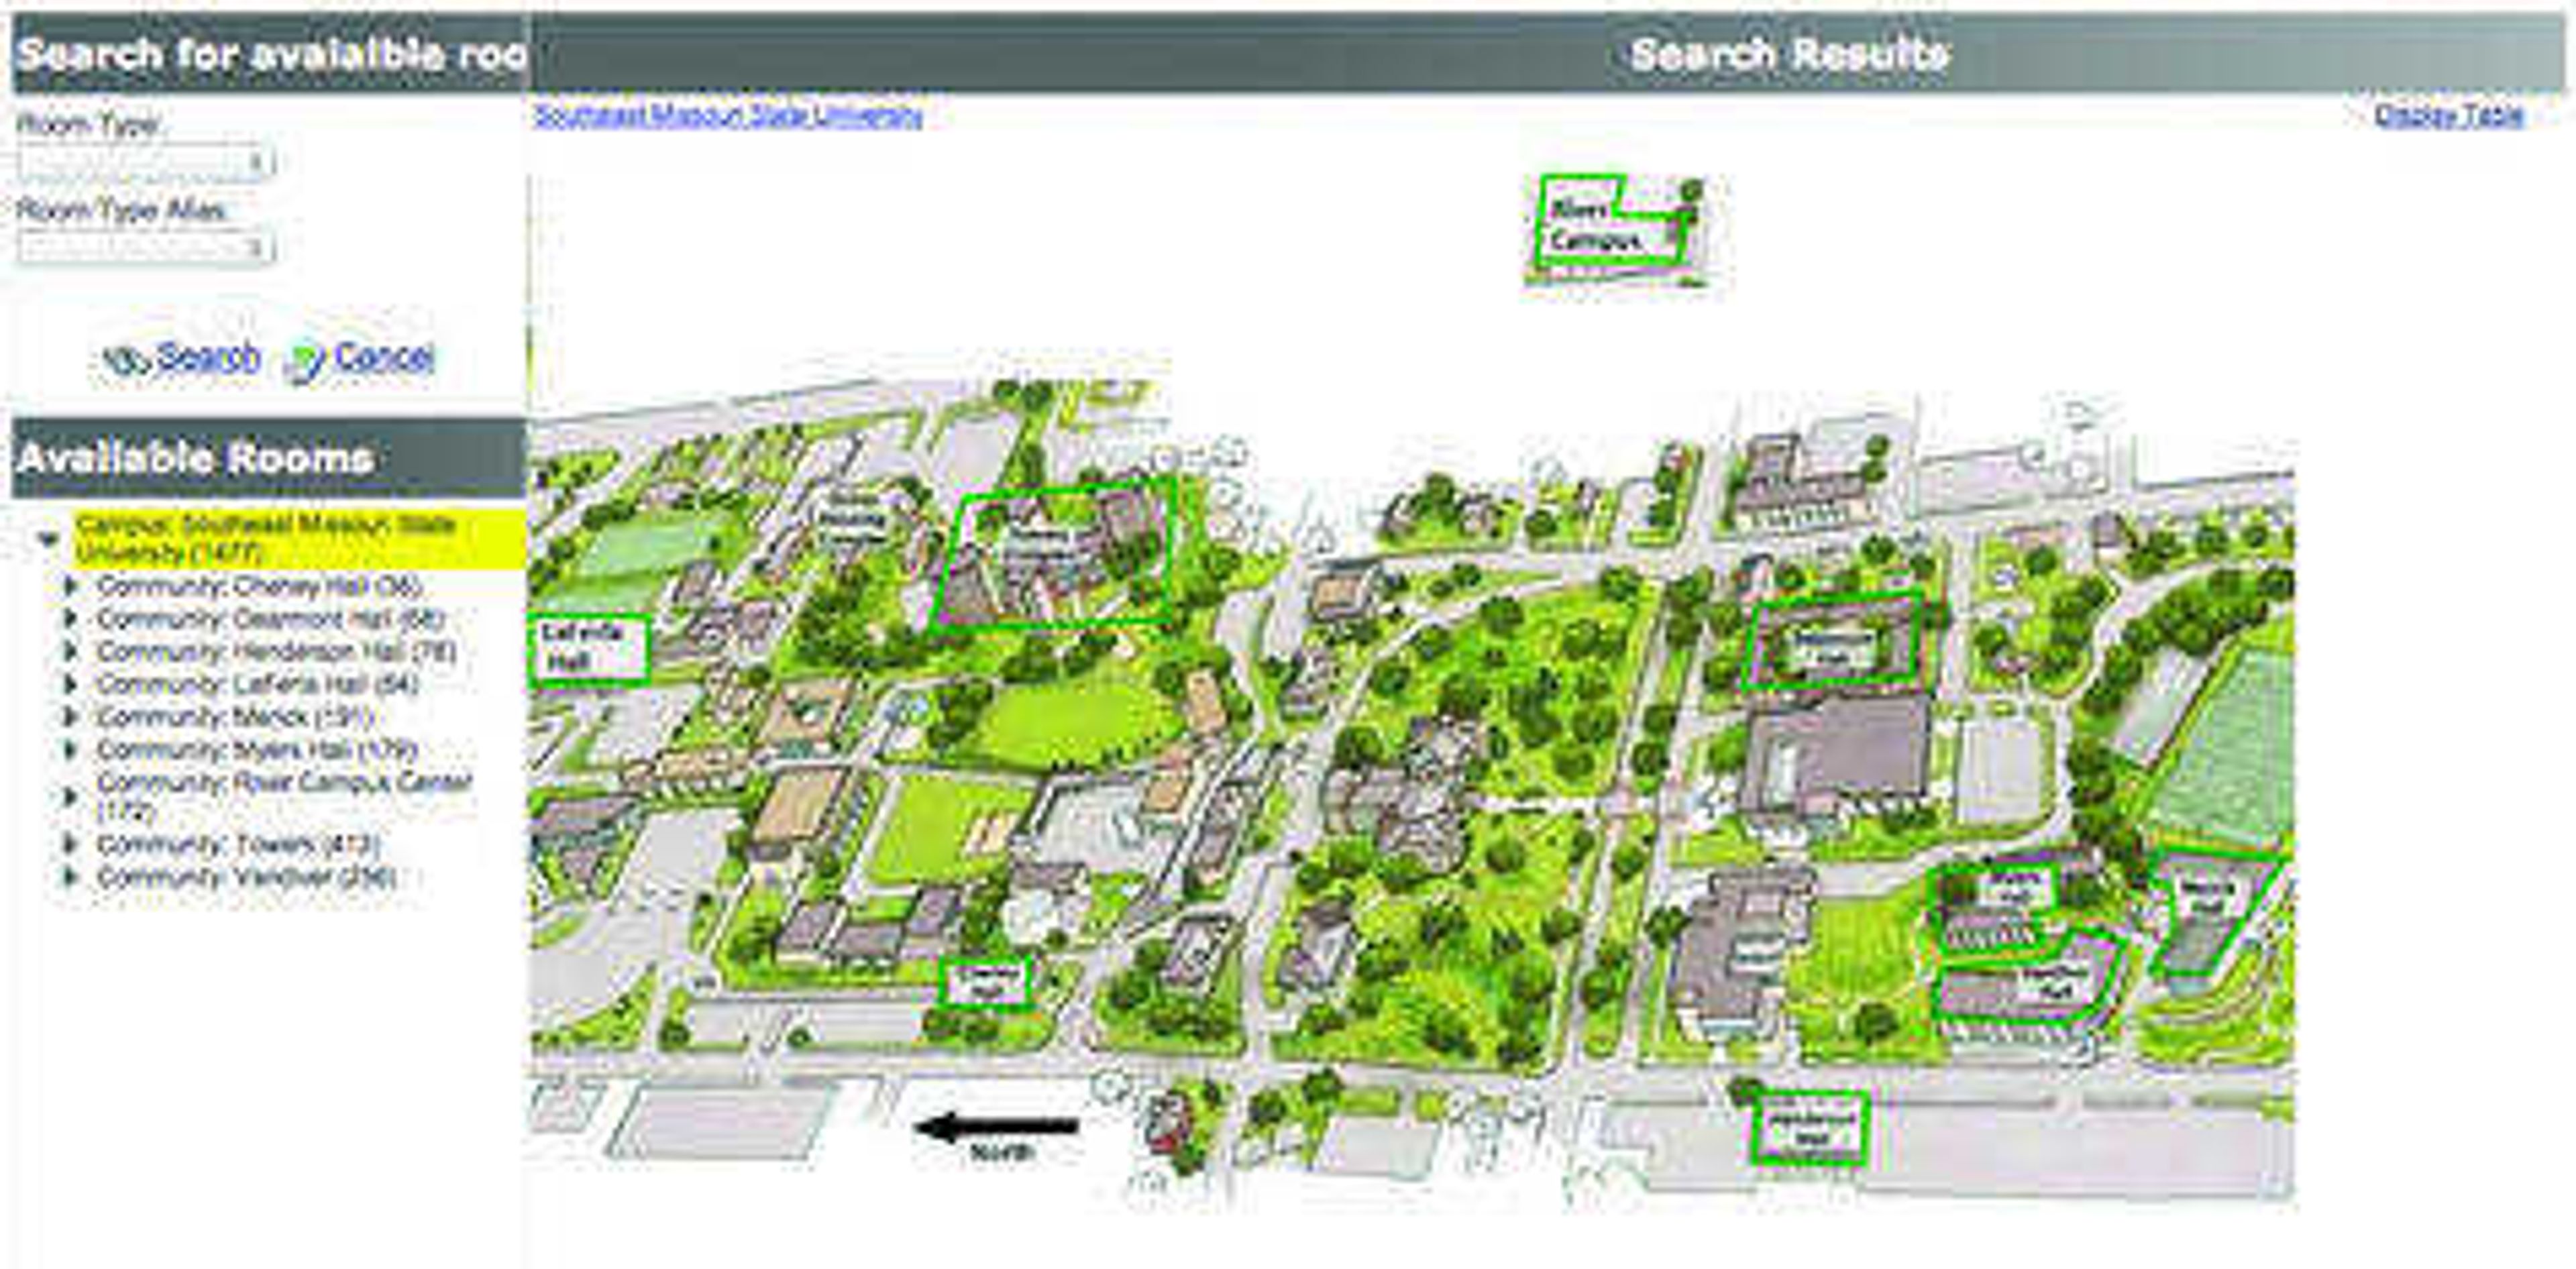 A screenshot of the map for selecting a building for on-campus housing.